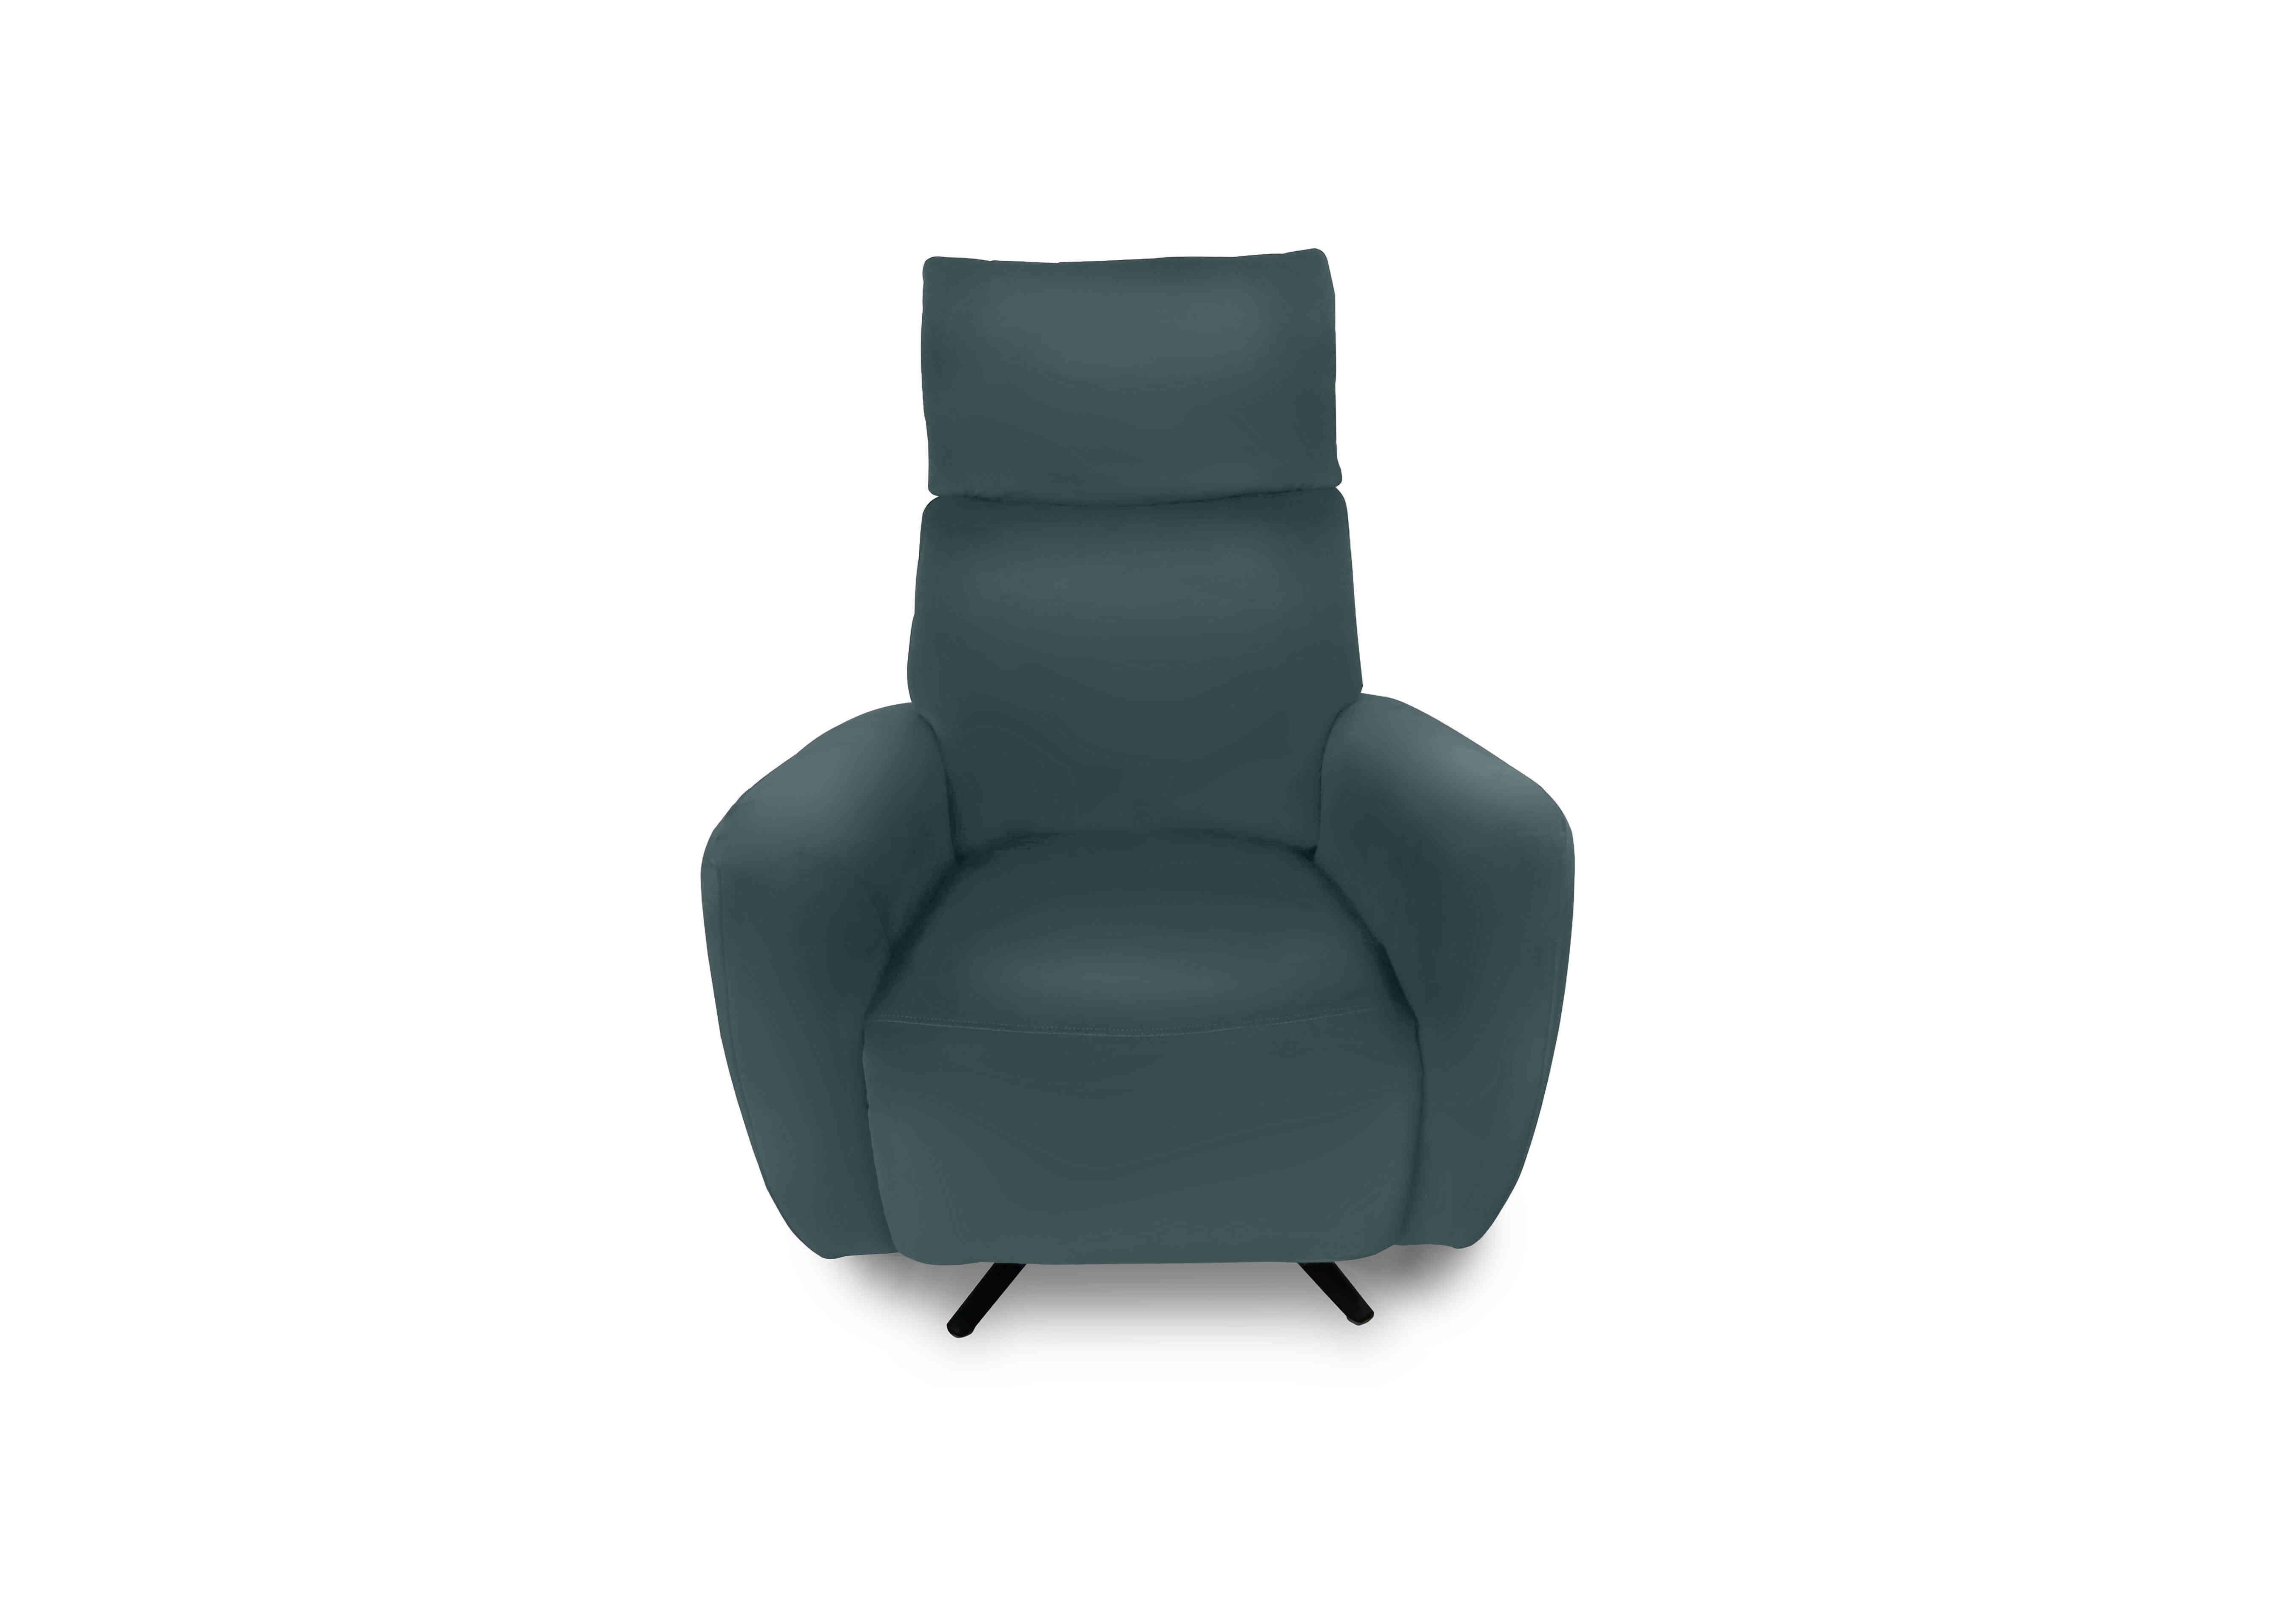 Designer Chair Collection Granada Leather Power Recliner Swivel Chair with Massage Feature in Bv-301e Lake Green on Furniture Village